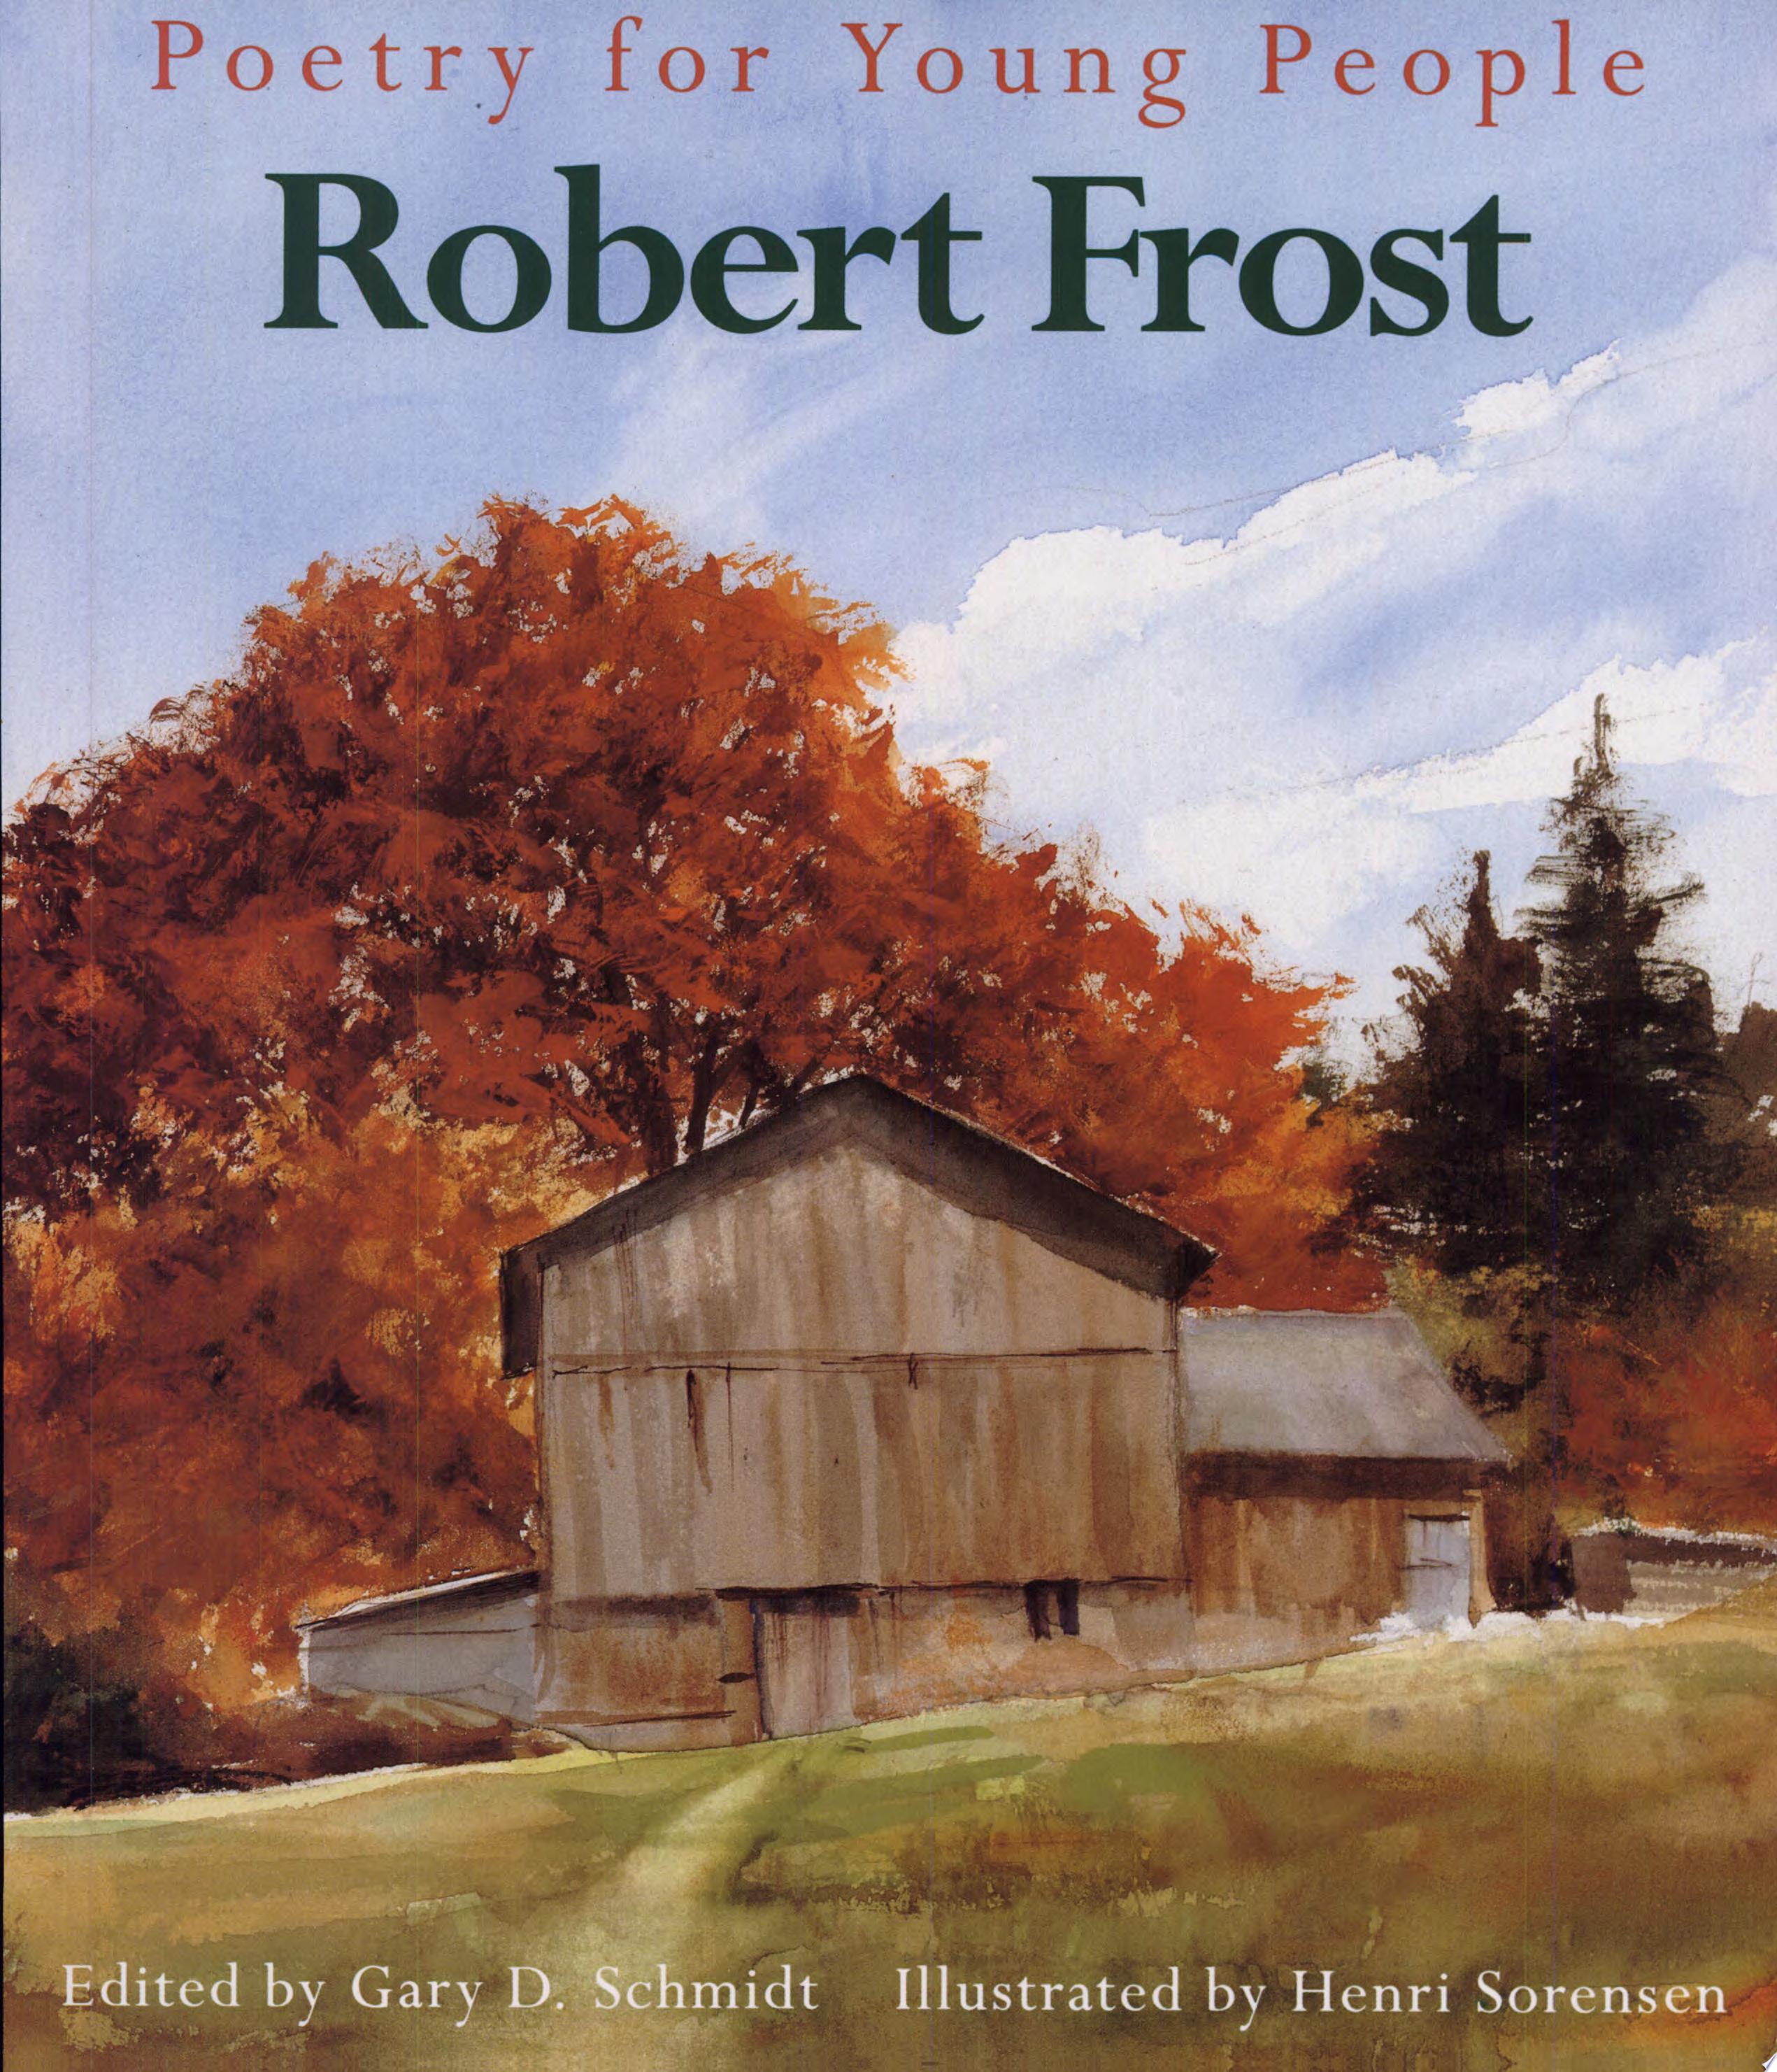 Image for "Robert Frost"